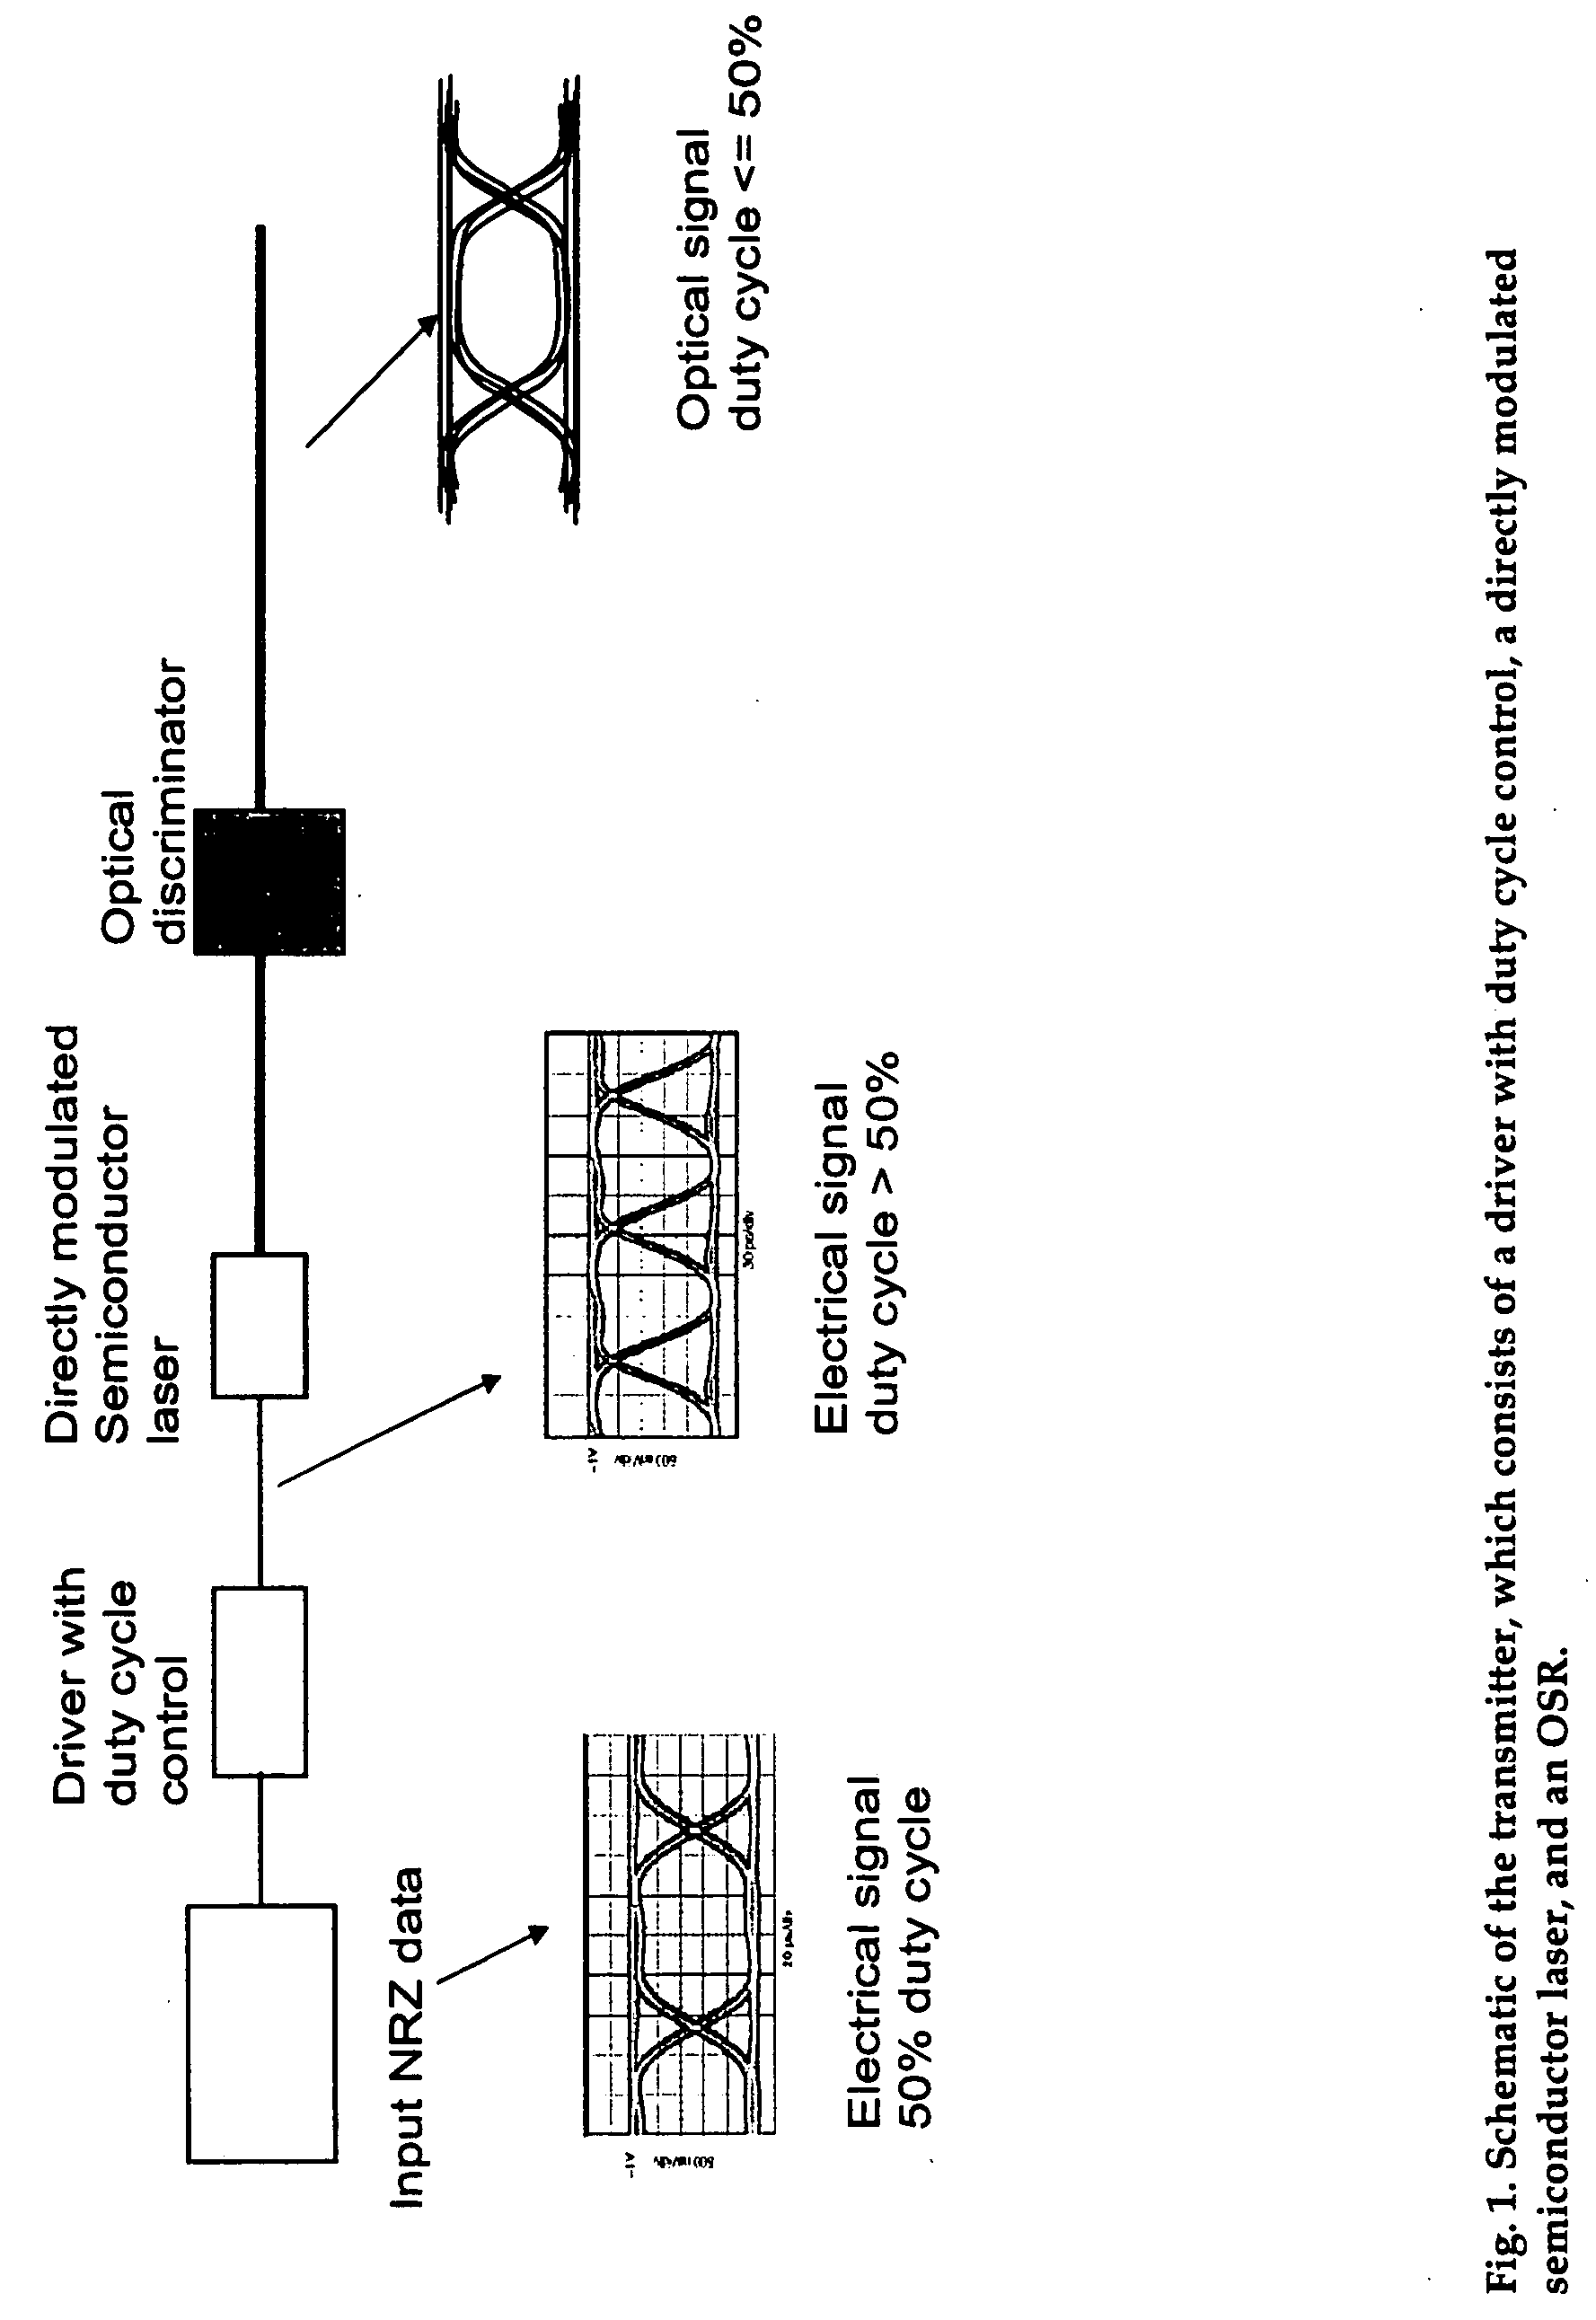 Method and apparatus for transmitting a signal using thermal chirp management of a directly modulated transmitter